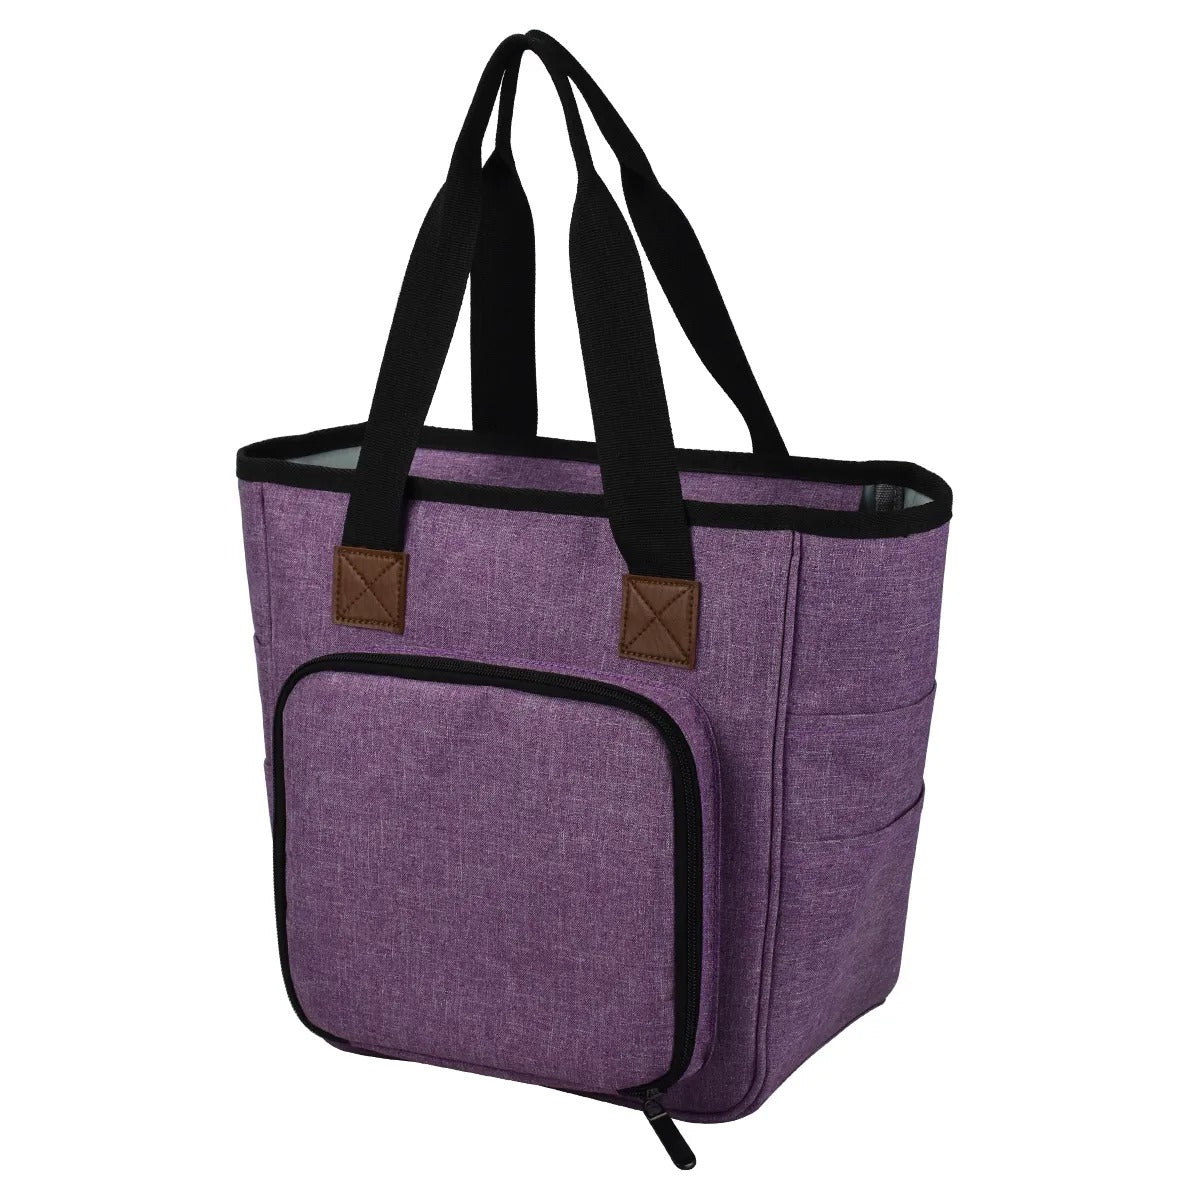 Purple yarn organizer tote with front pocket and black handles, perfect for carrying knitting essentials.